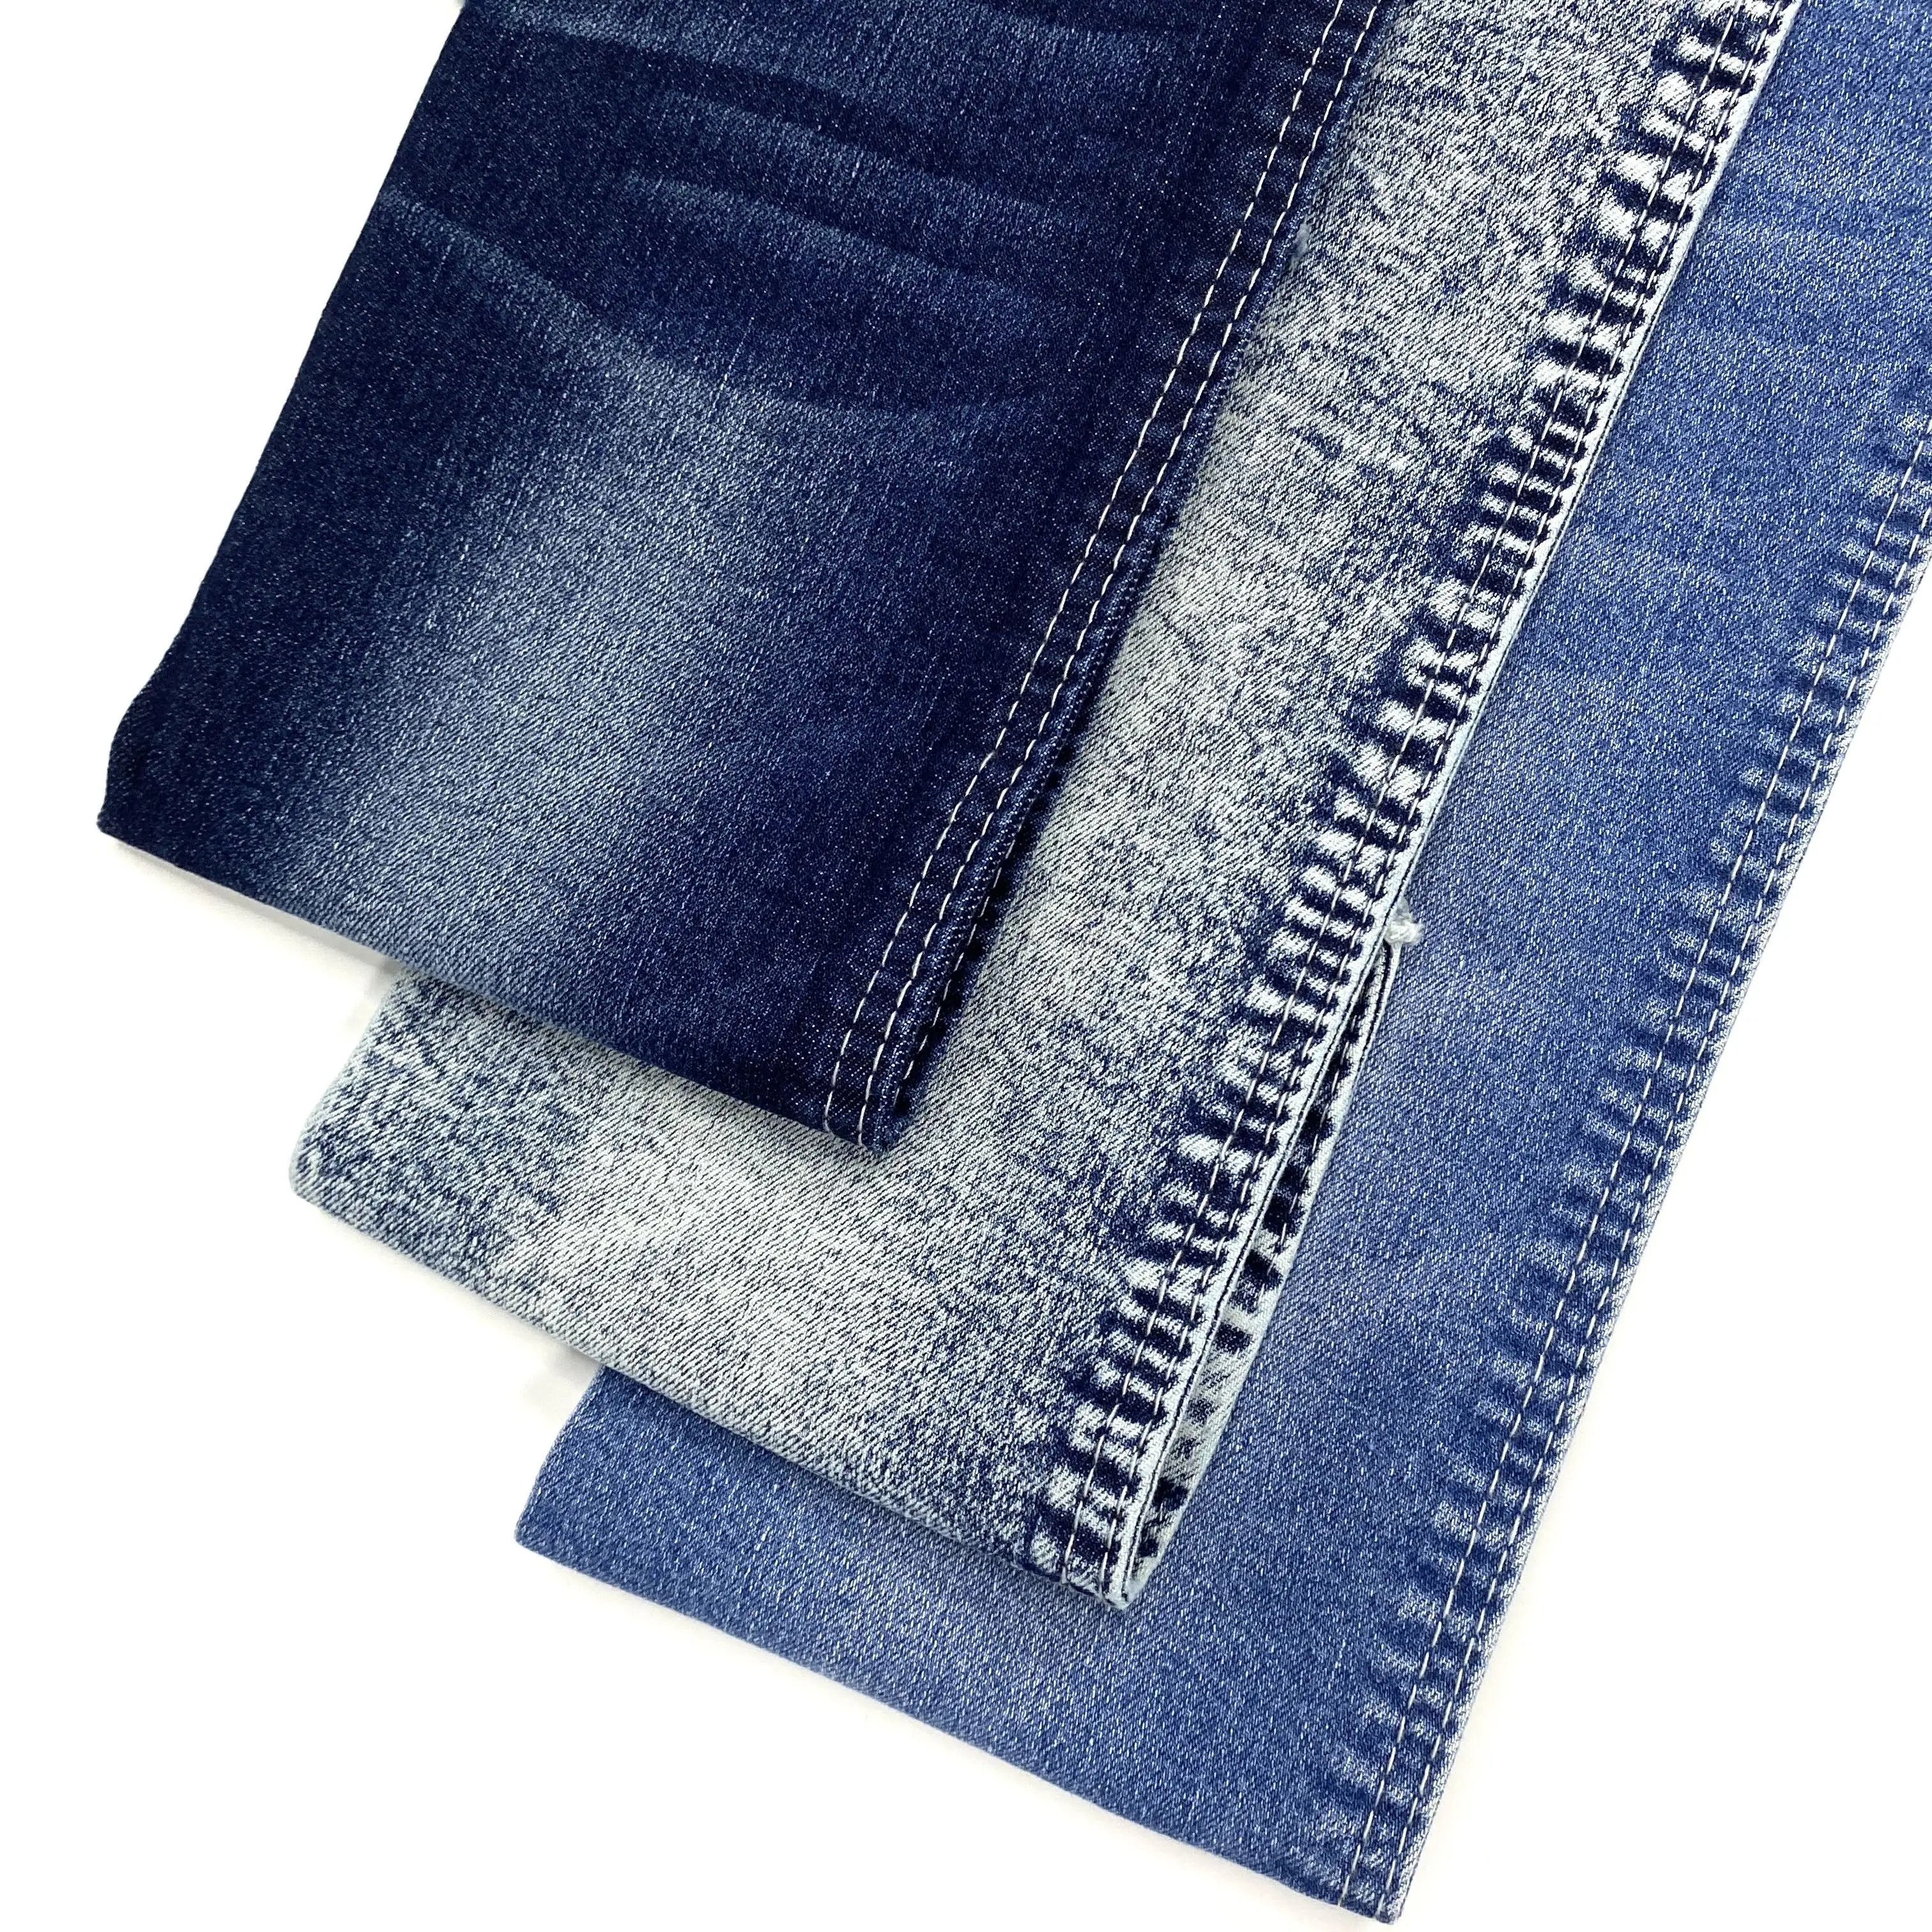 Wholesale High Quality 8x16/70TR Comfortable Cotton Hyper Stretch Denim Jeans Cool Fabric